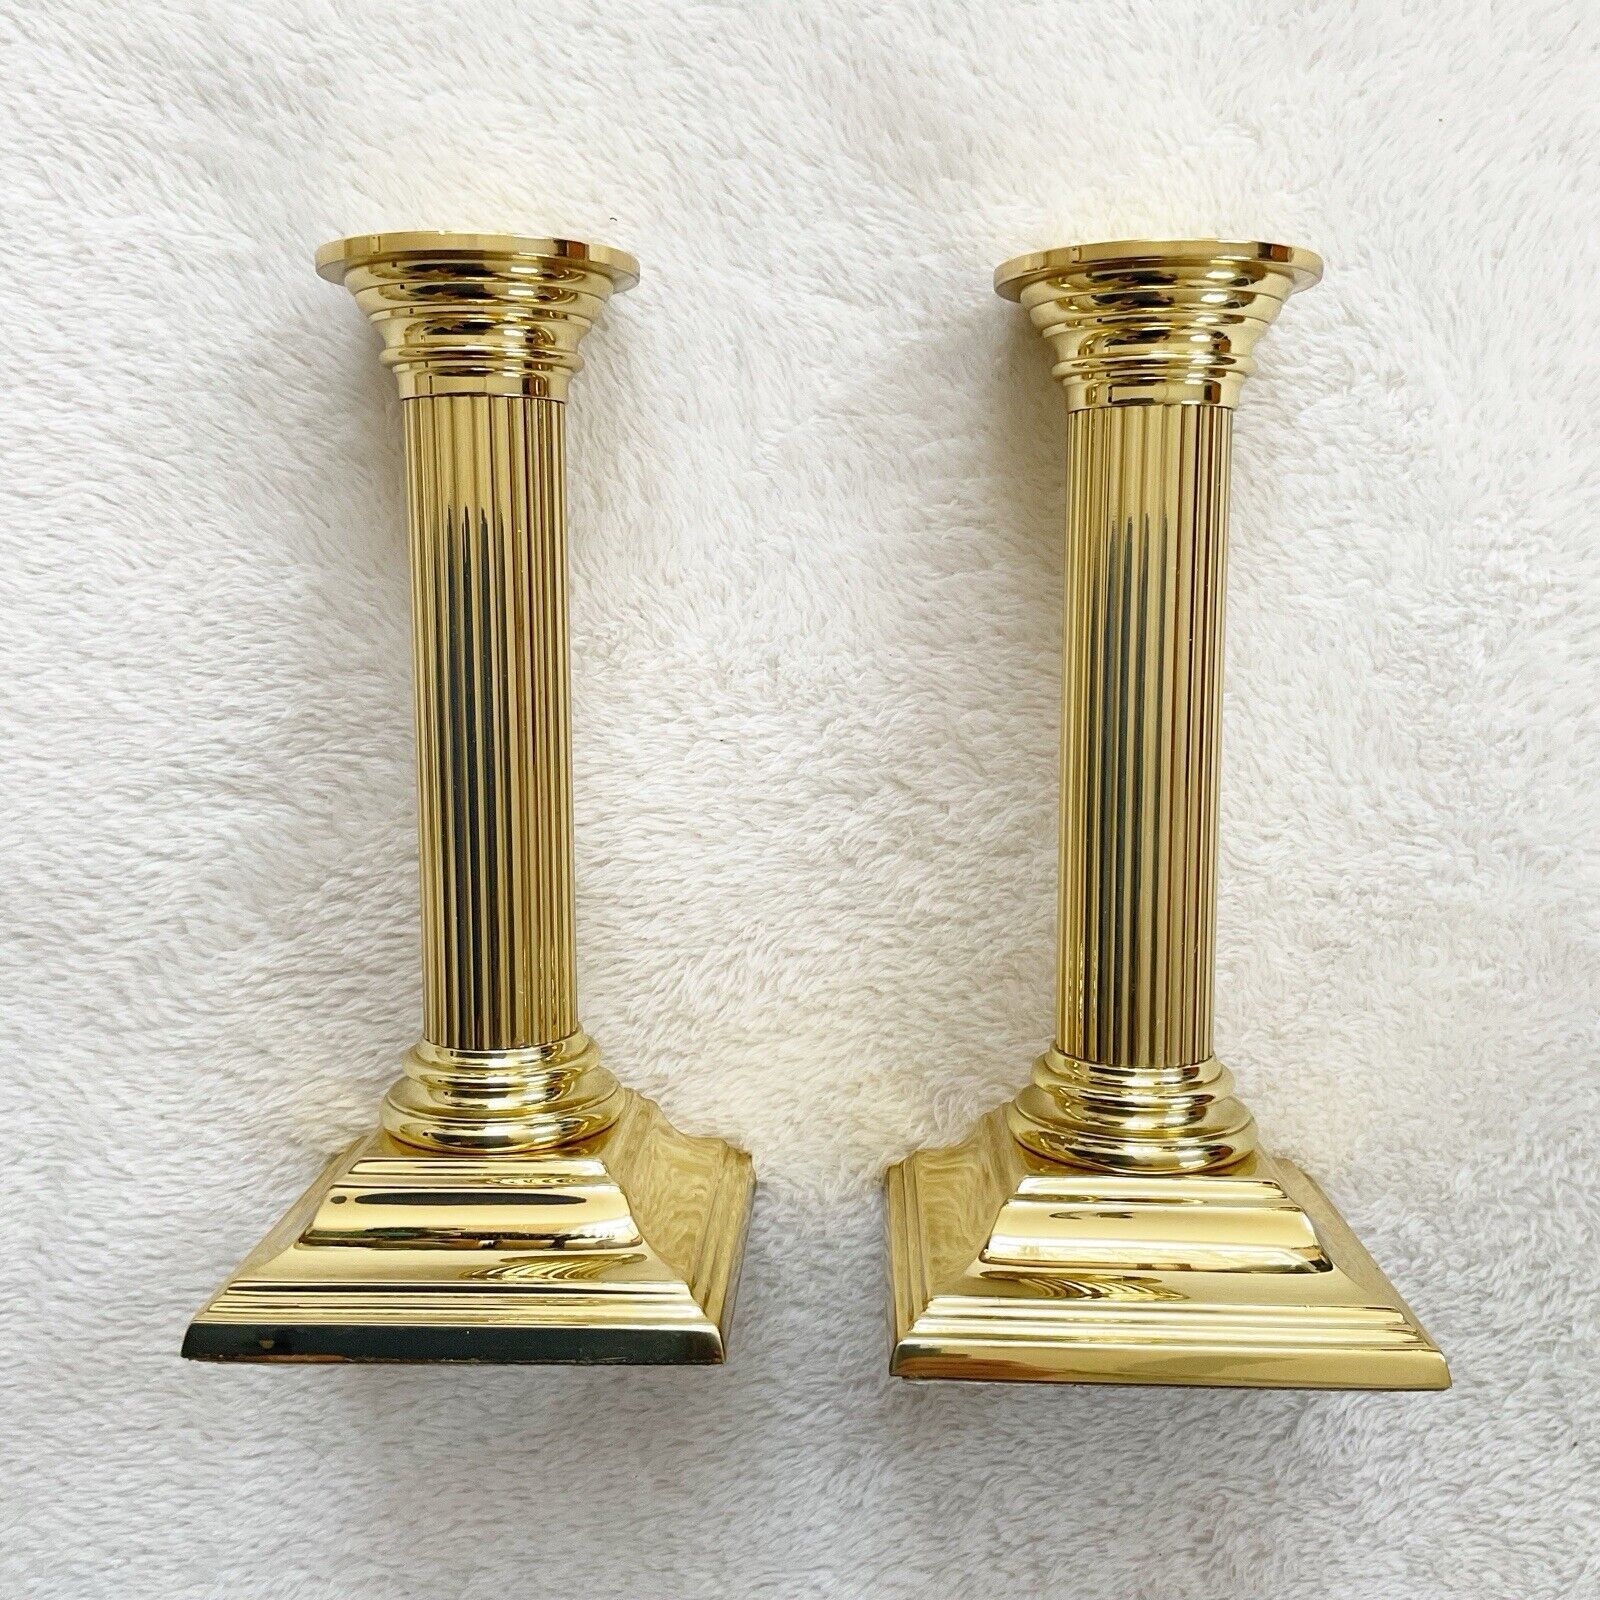 Vtg Baldwin Brass Smithsonian Candle Holders 6.5 inches Column American Museum